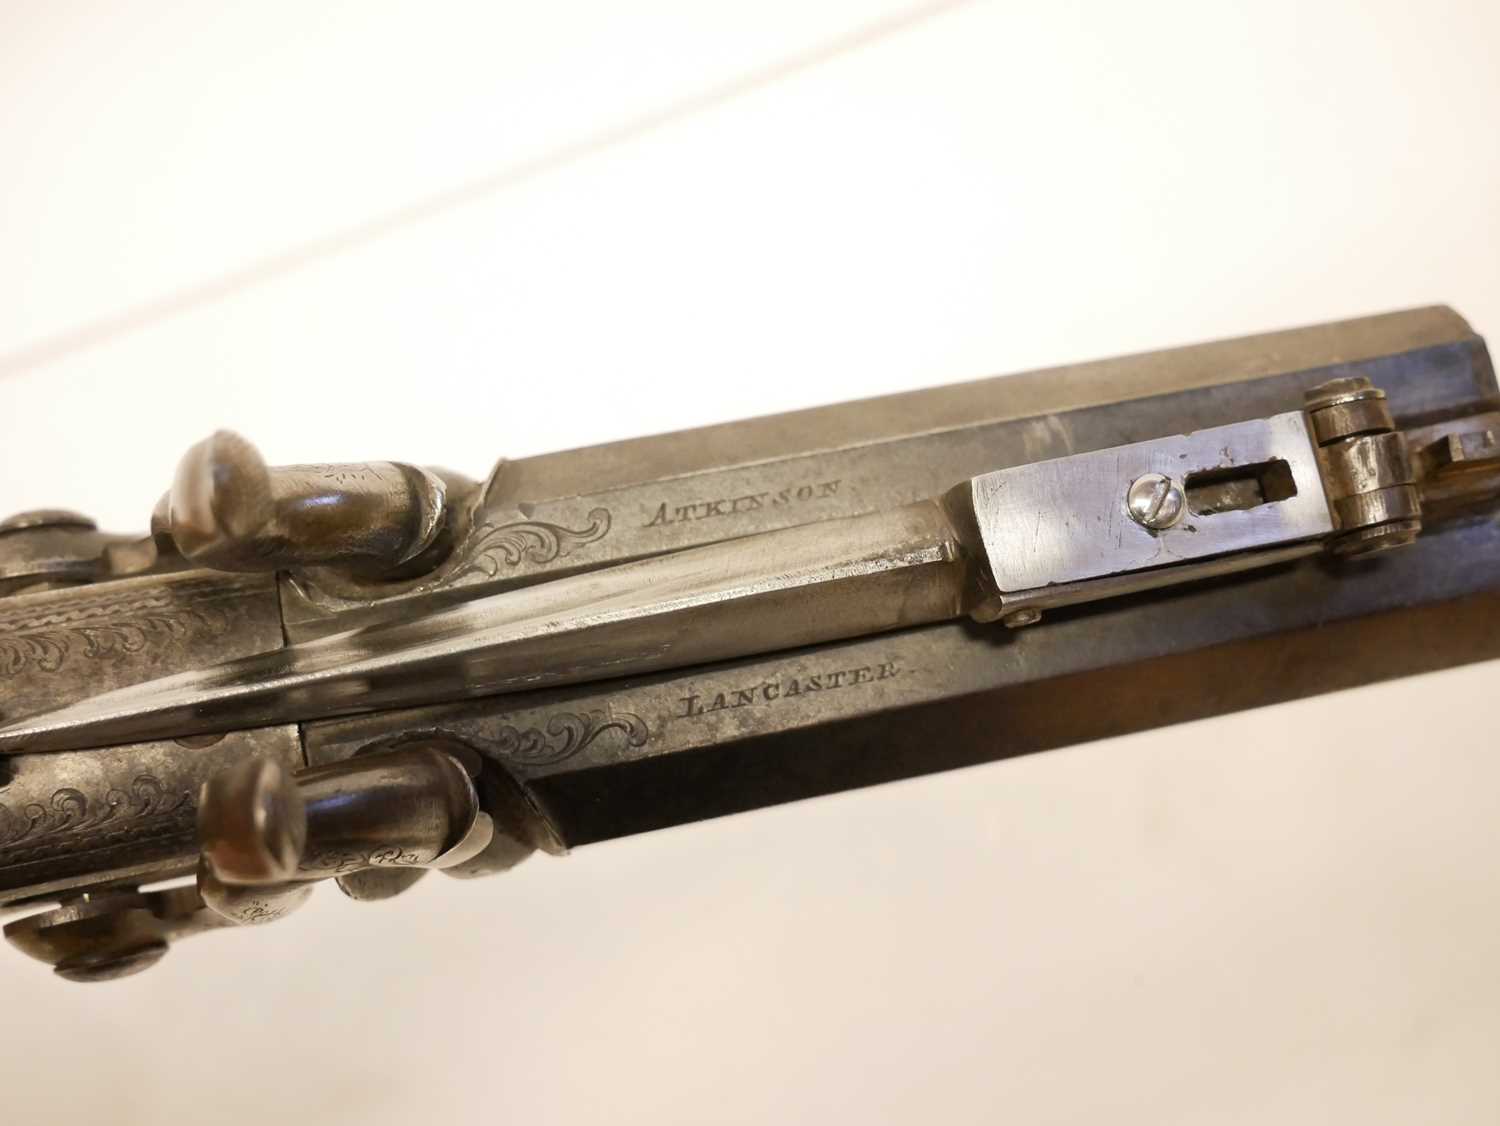 Atkinson of Lancaster double barrel pistol with bayonet - Image 5 of 12